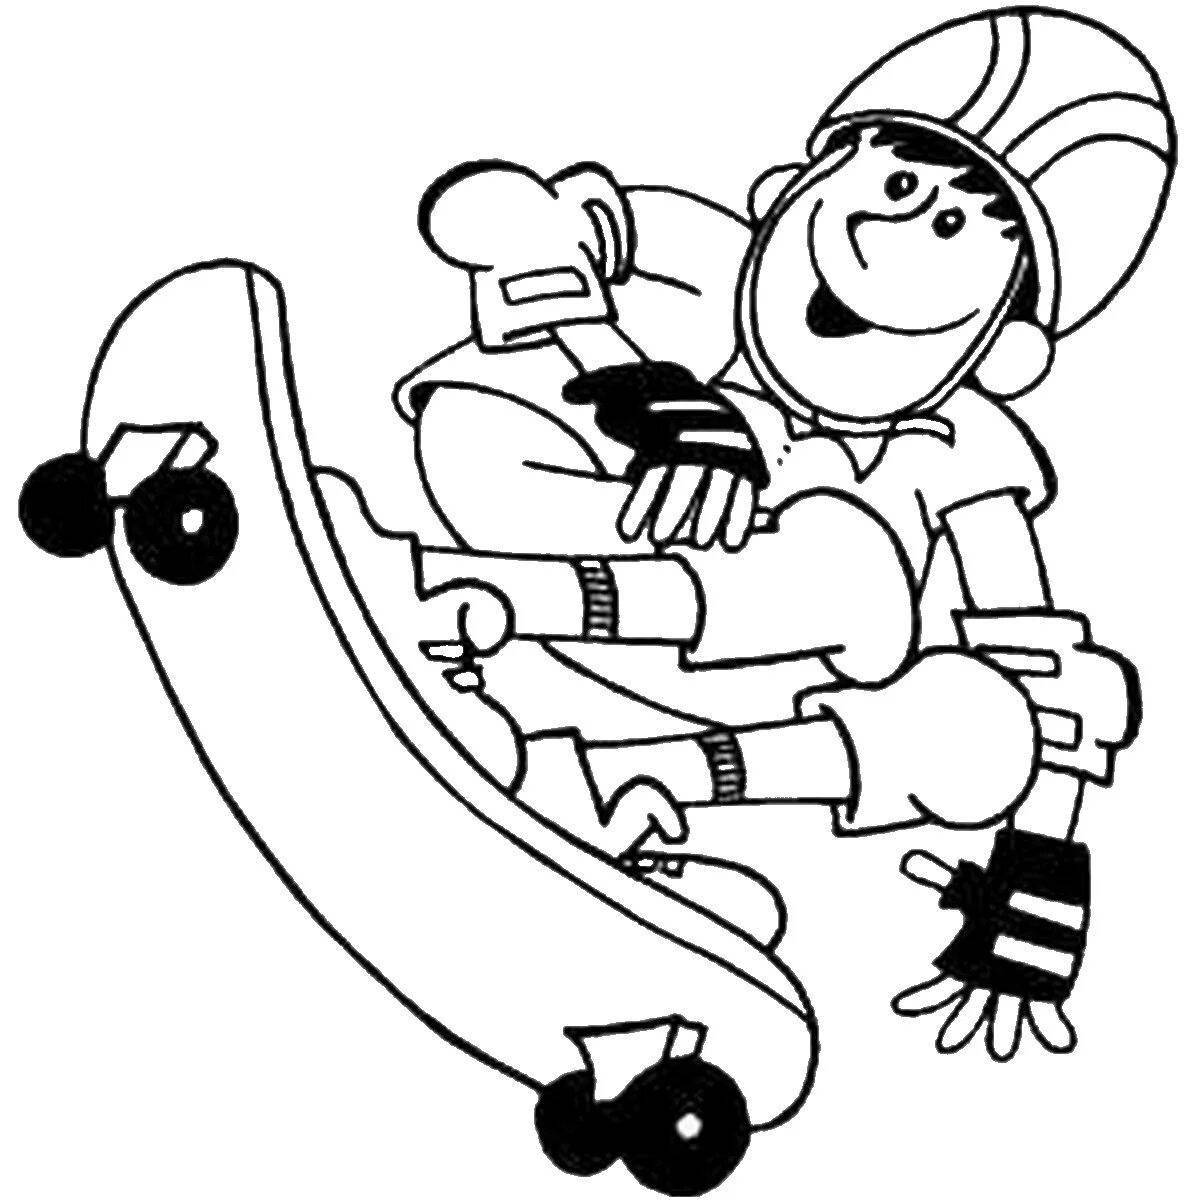 Coloring page dazzling skateboarder